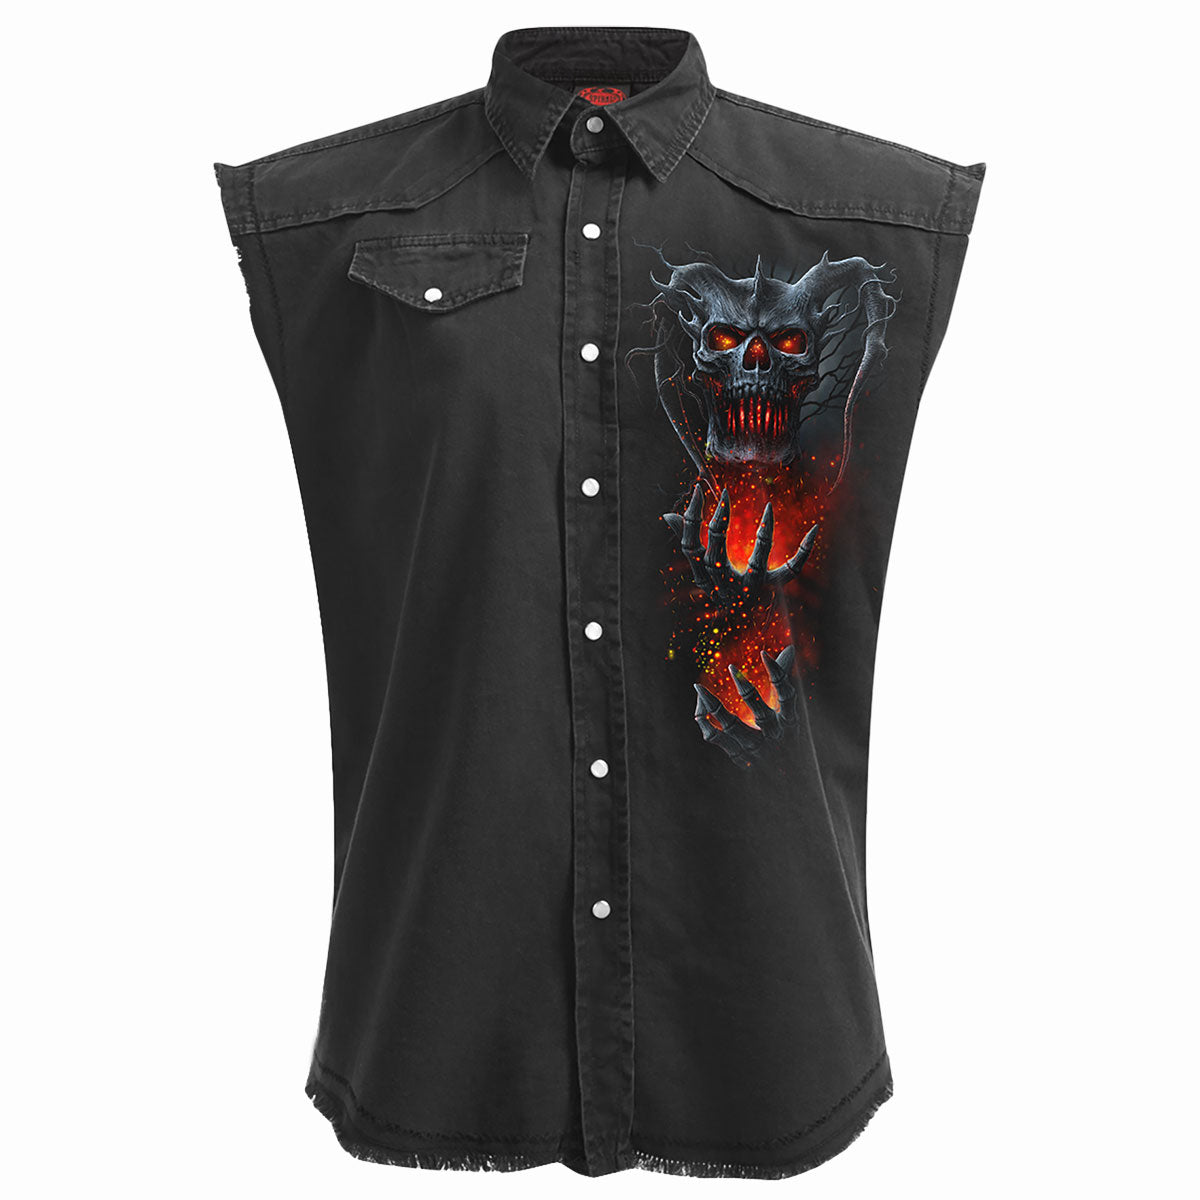 DEATH EMBERS - Sleeveless Stone Washed Worker Black